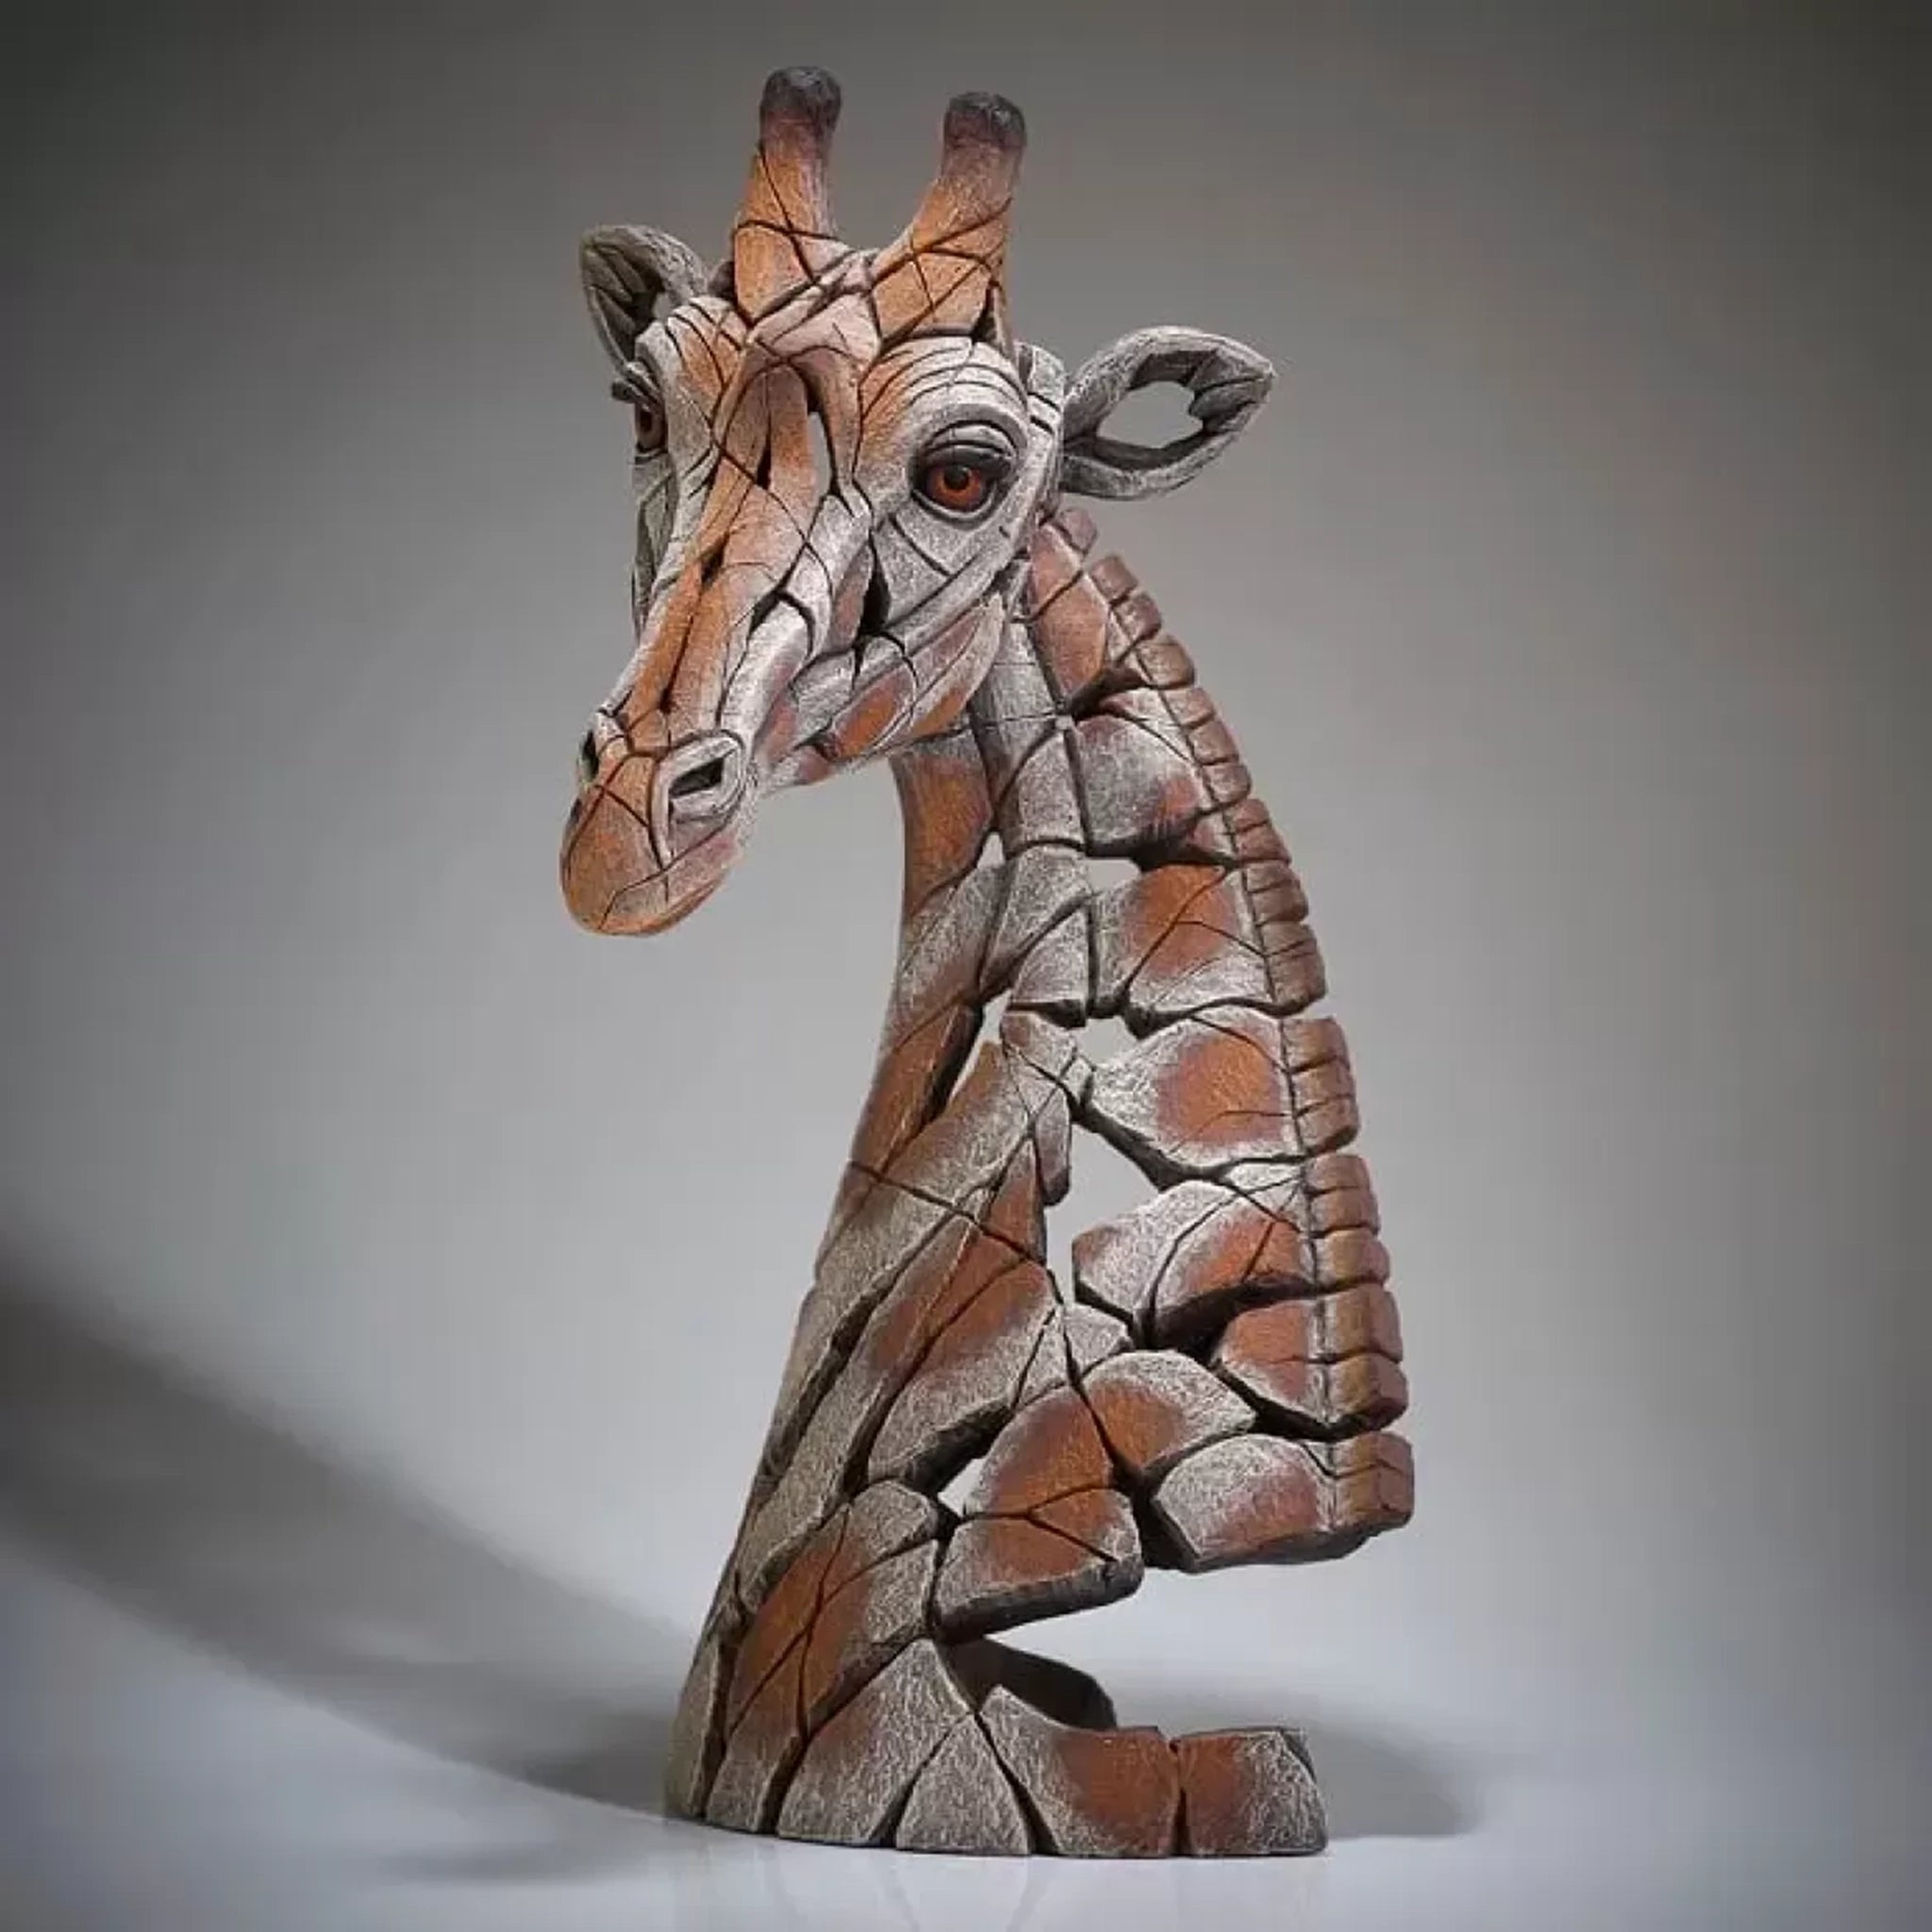 A textured and painted giraffe head bust sculpture side view